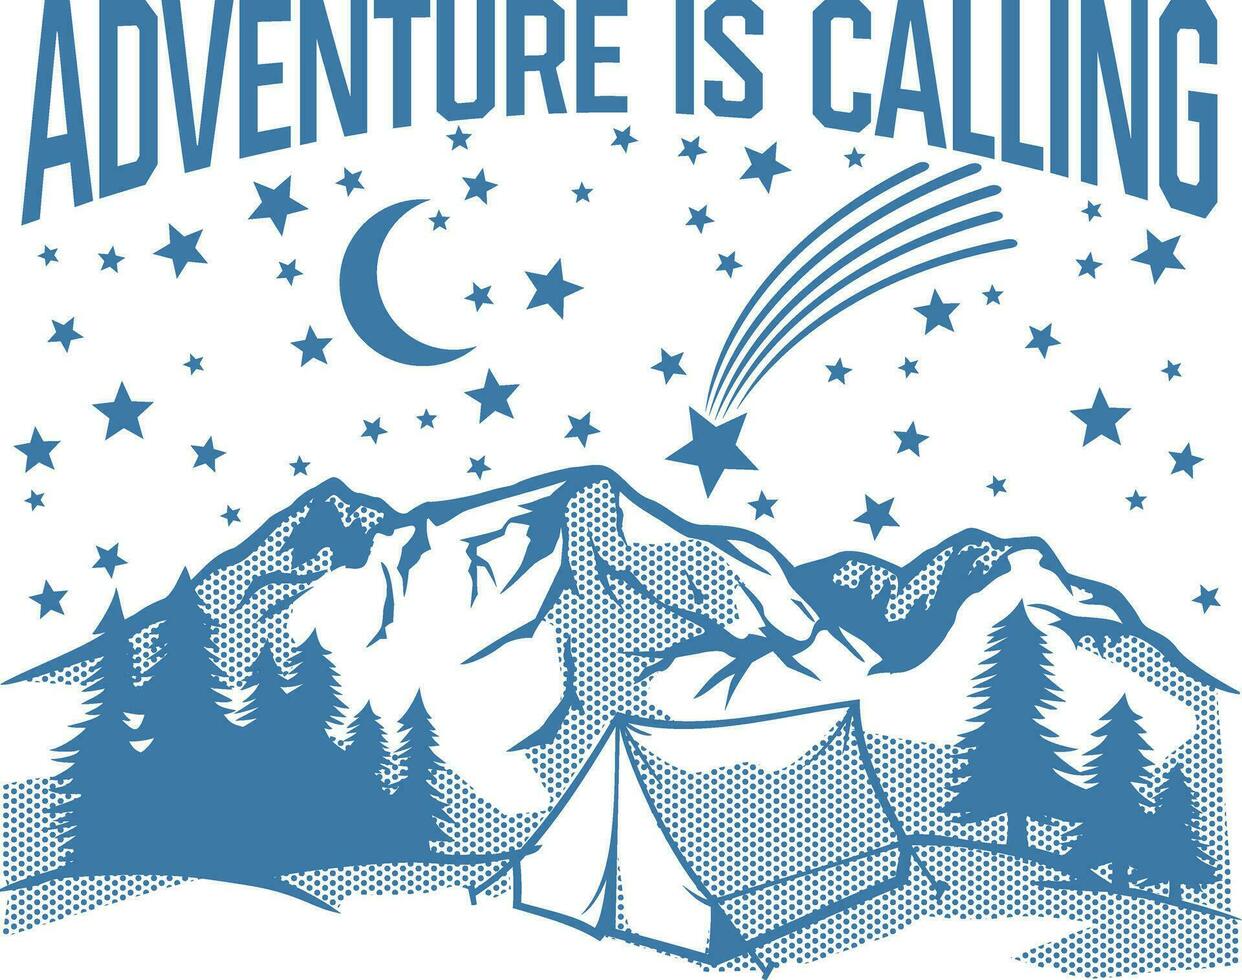 Adventure is Calling. Mountain Landscape with Starry Night, Forest and Tent. Vector Illustration.